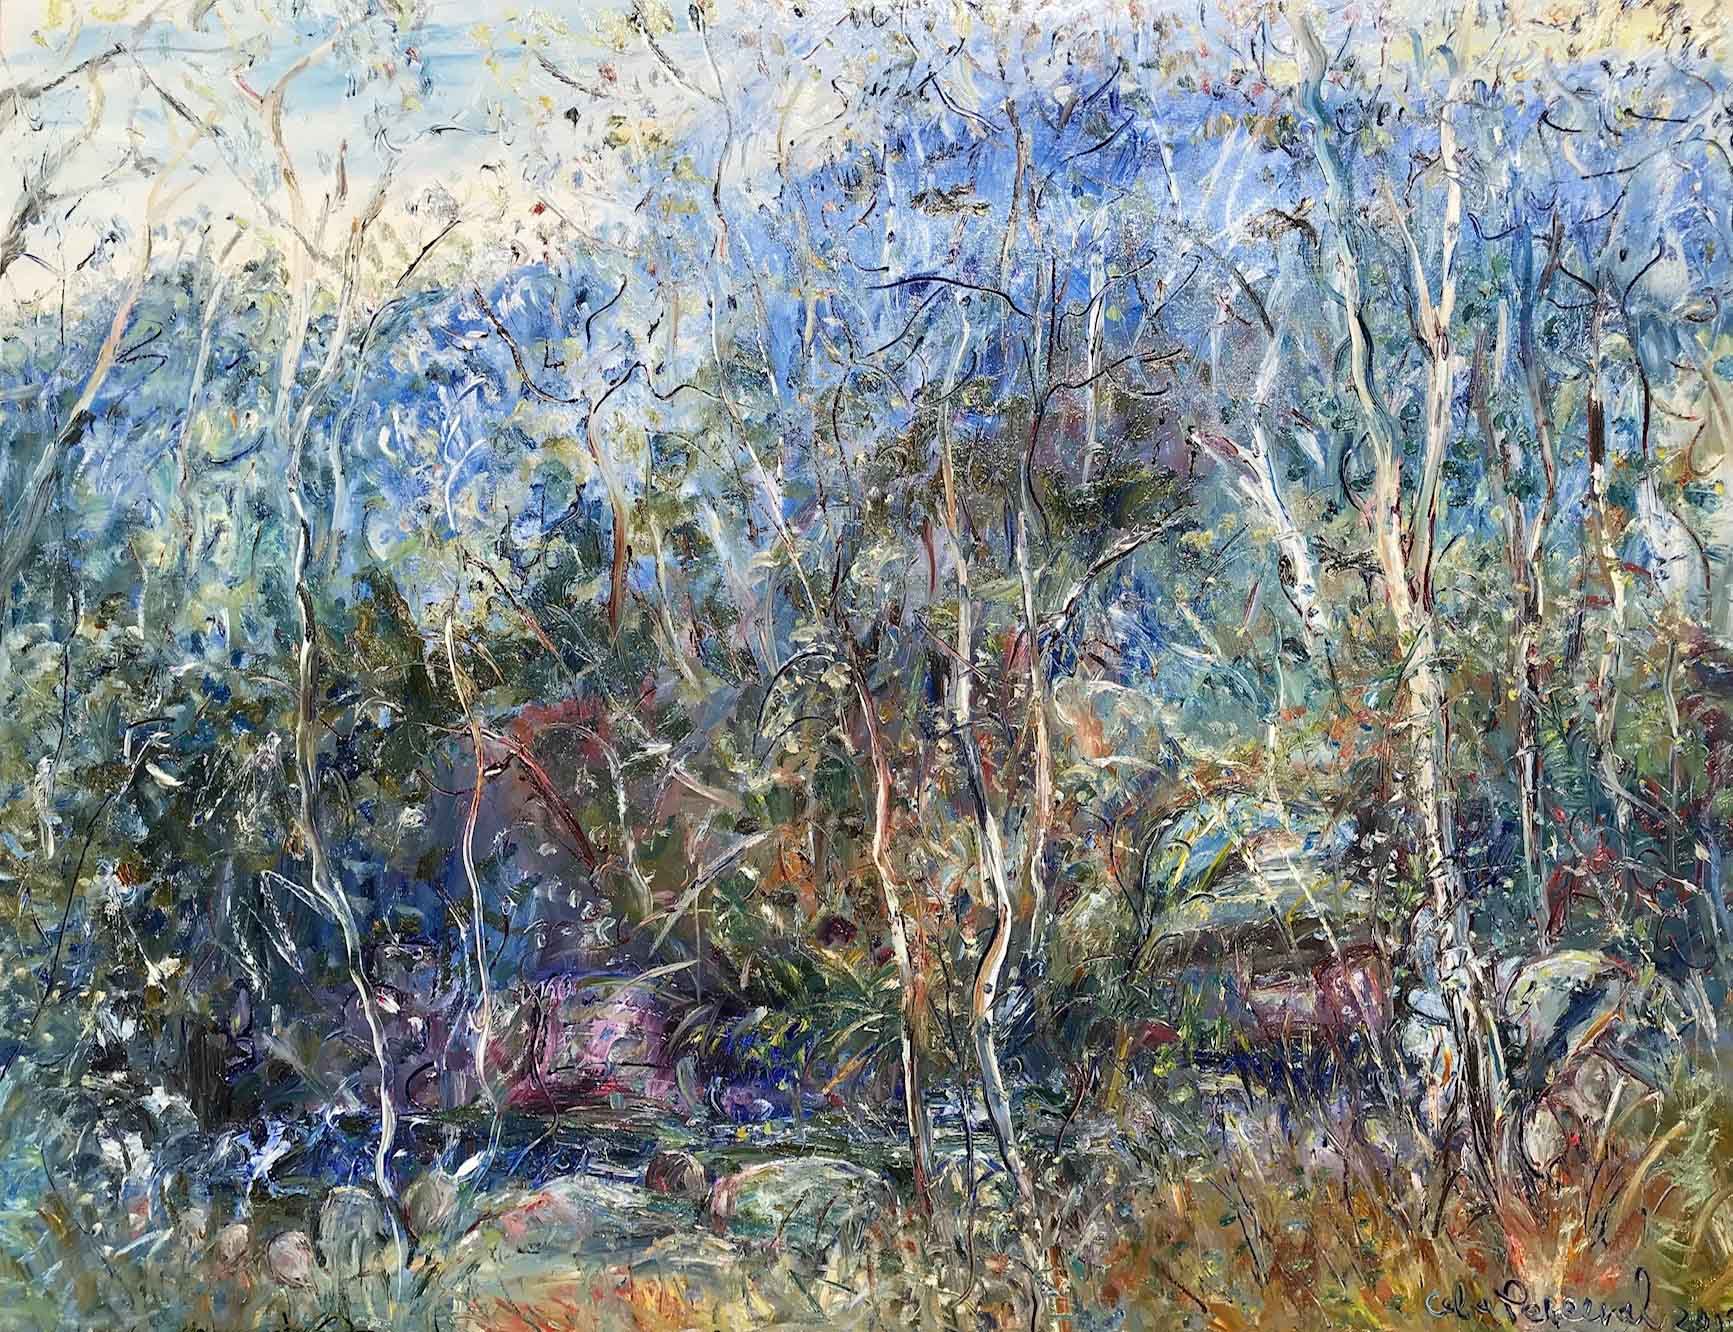 Celia Perceval 'Black Cockatoos Deep in the Gully with Rock Pools on Bells Creek' oil on canvas 153 x 198cm